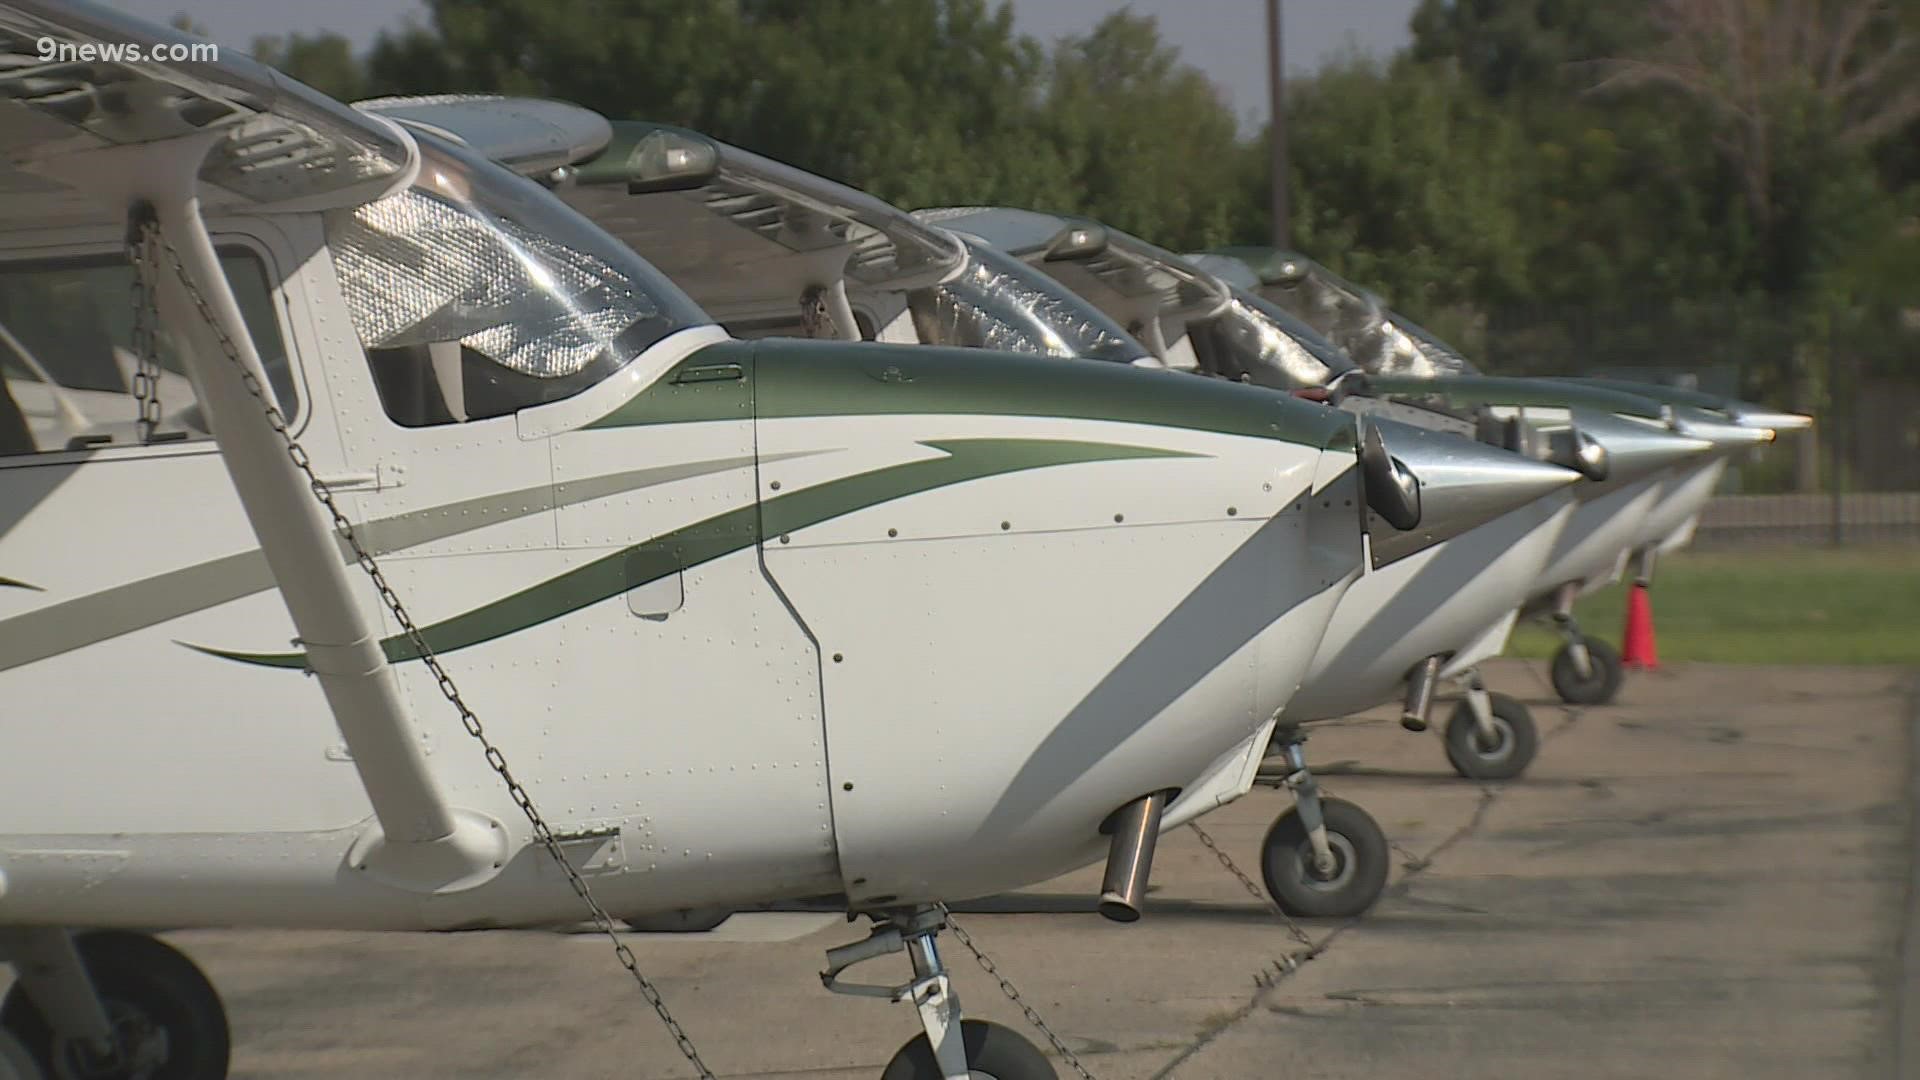 The partnership aims to help meet industry demand for commercial airline pilots quicker.